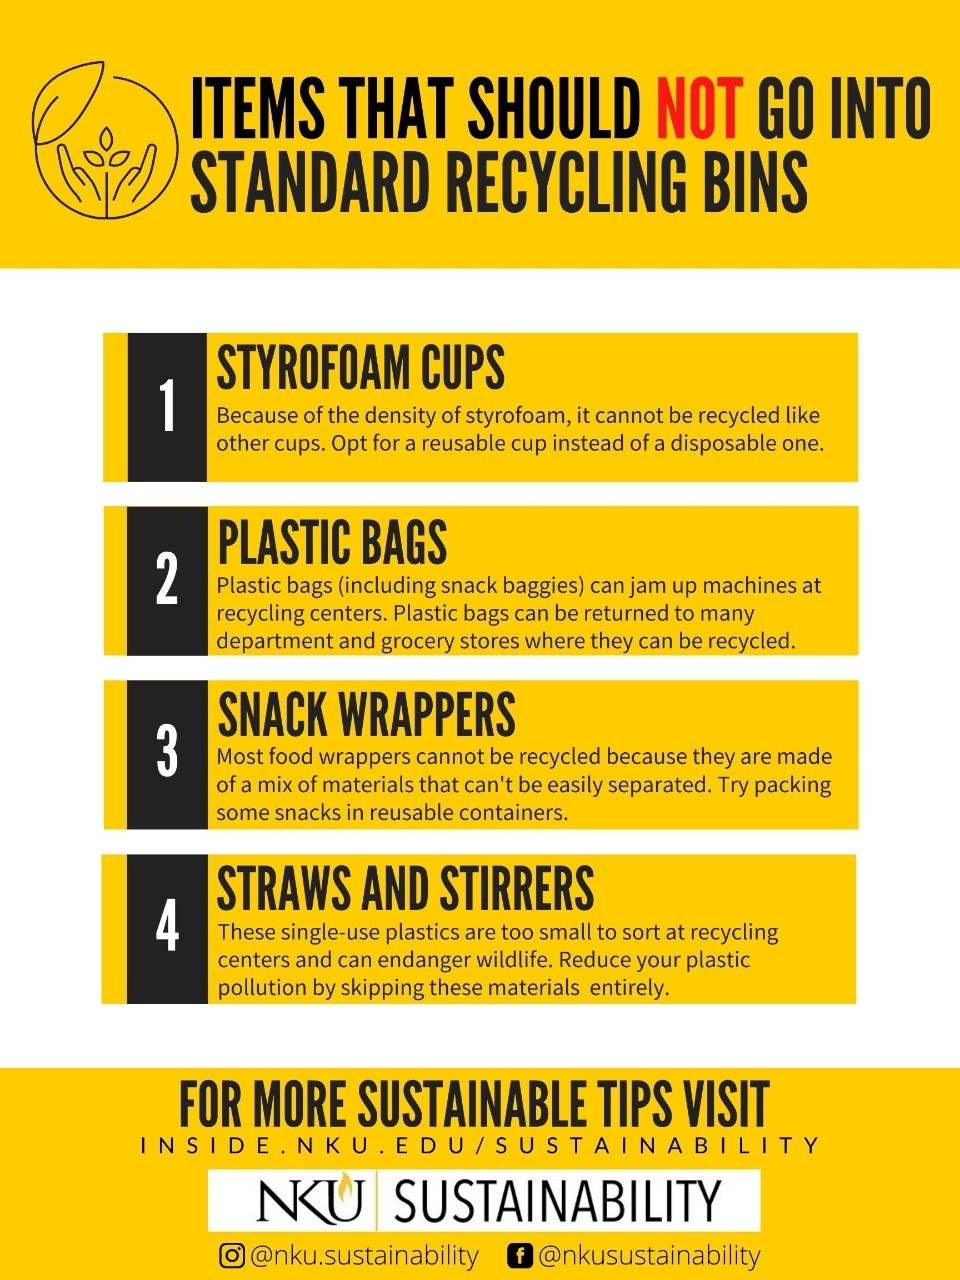 List of items that cannot be placed in standardized recycling: Styrofoam cups, plastic bags, snack wrappers, straws and stirrers